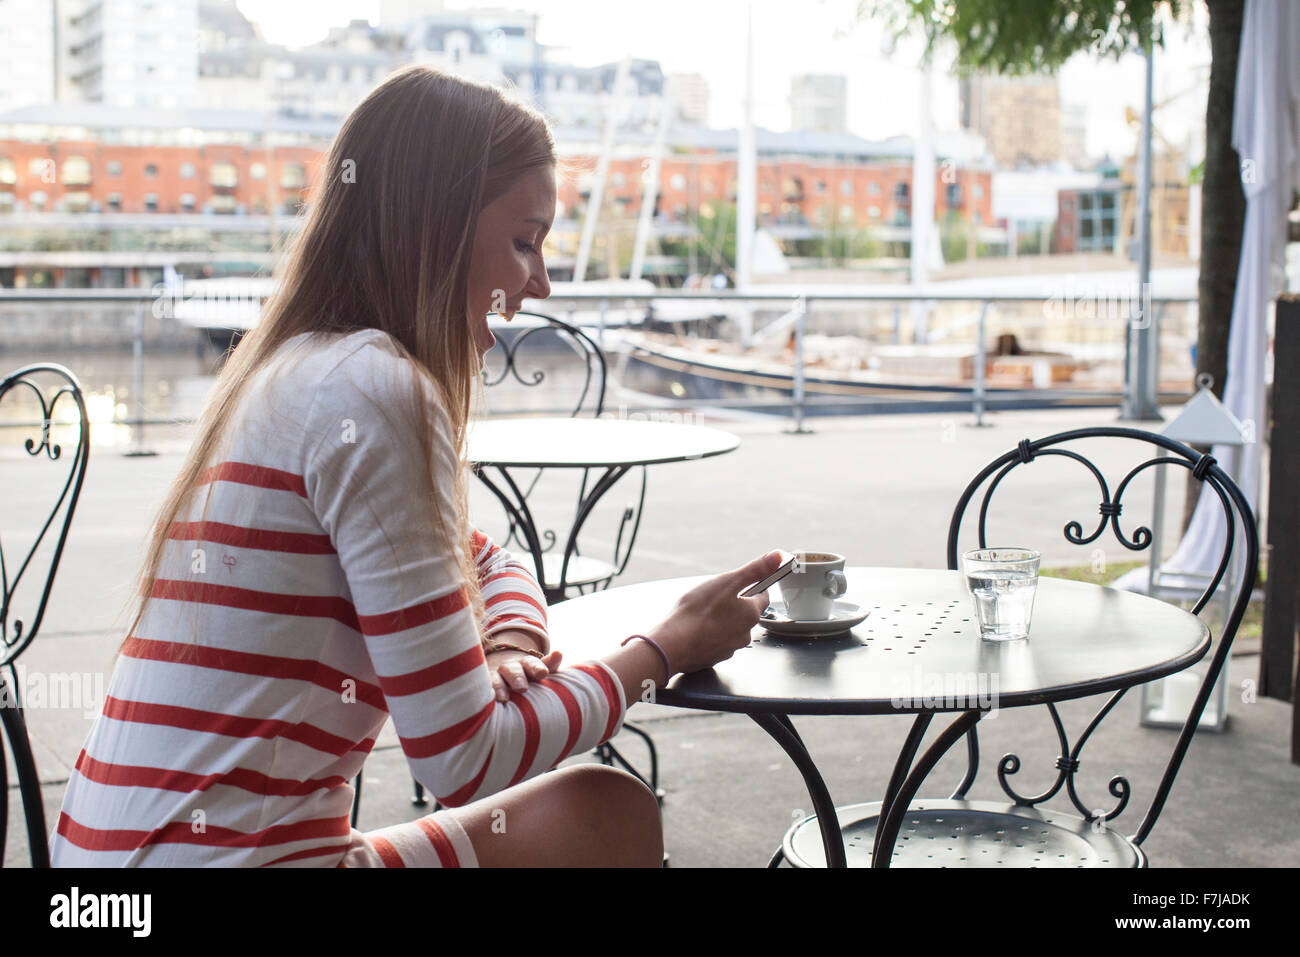 Young woman sitting at sidewalk cafe, laughing at smartphone Stock Photo